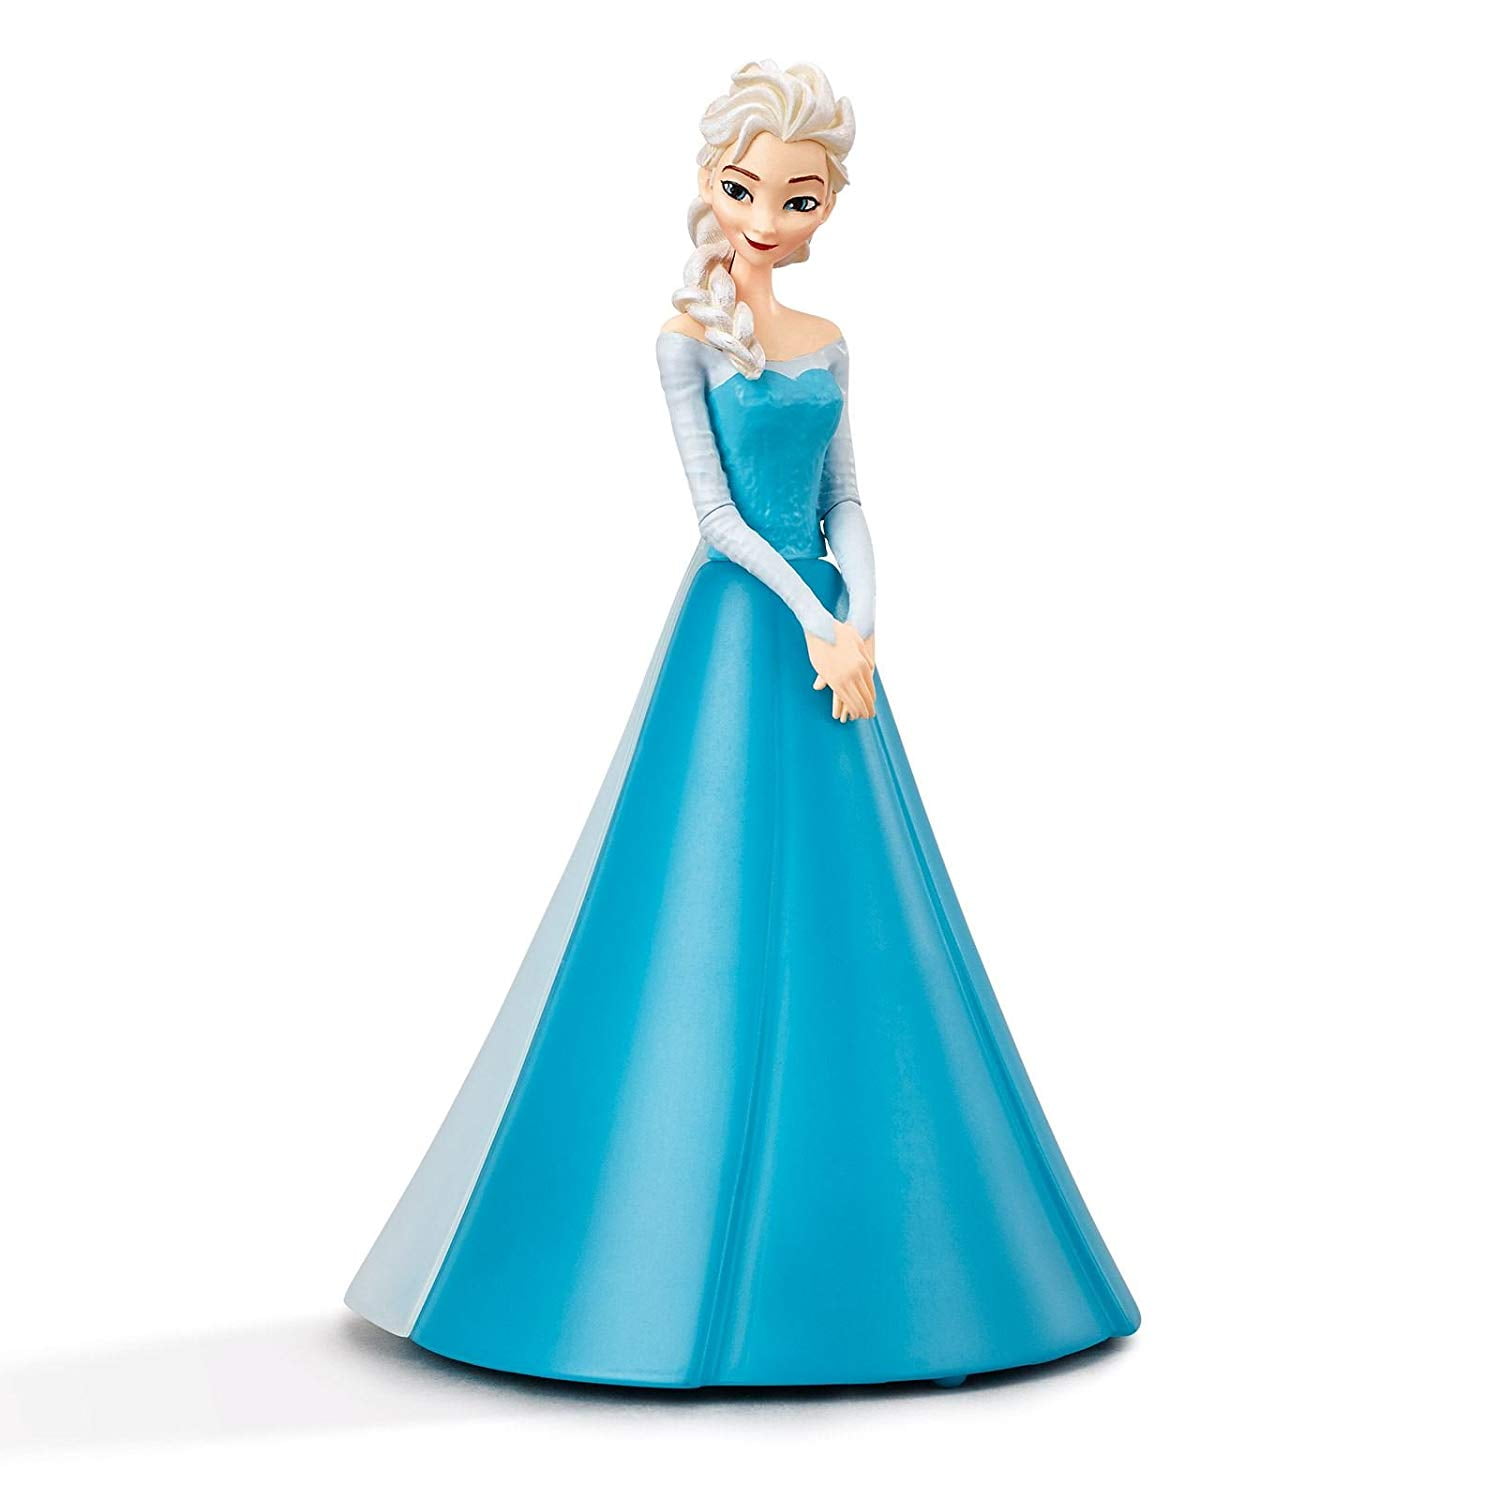 Frozen Personalized FREE Disney Elsa LED Night Light Lamp with Remote Control 